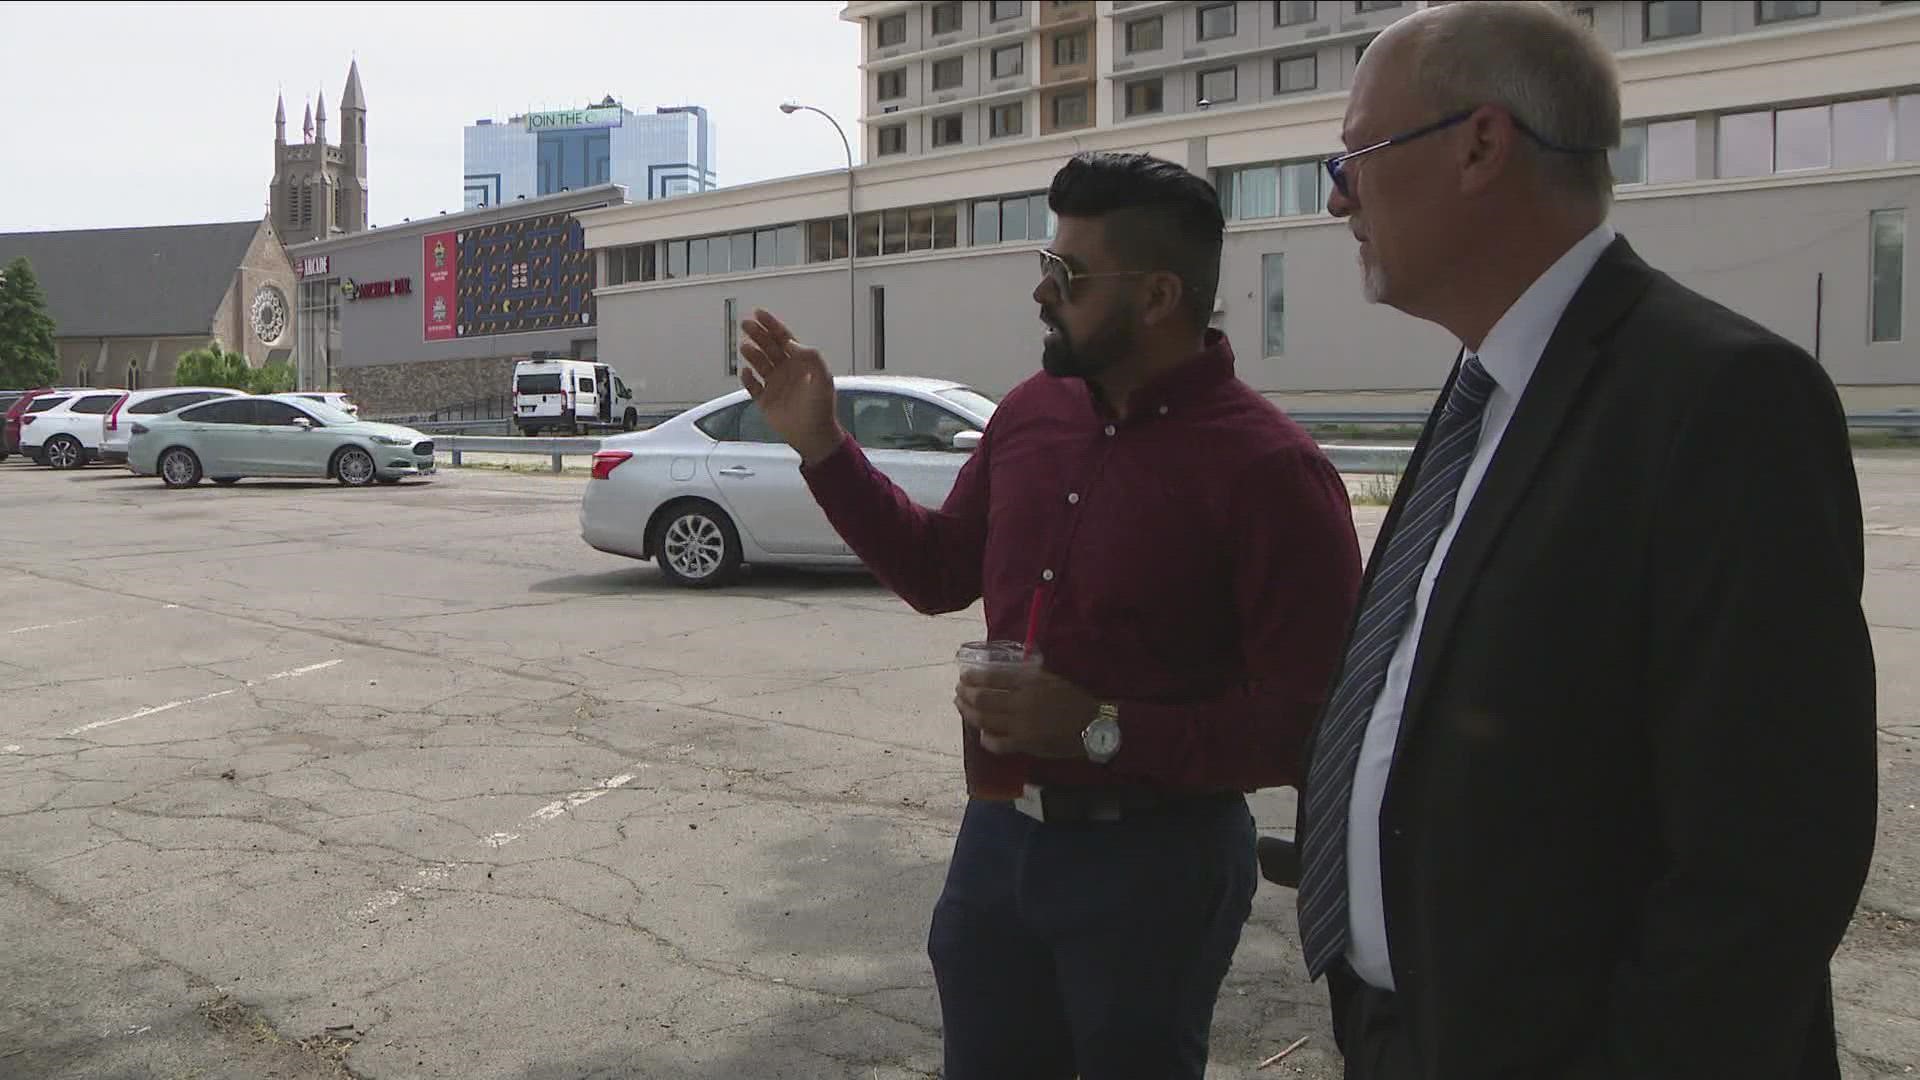 Nirel Patel says the city increased parking spaces he leases from $40 per month to $200.